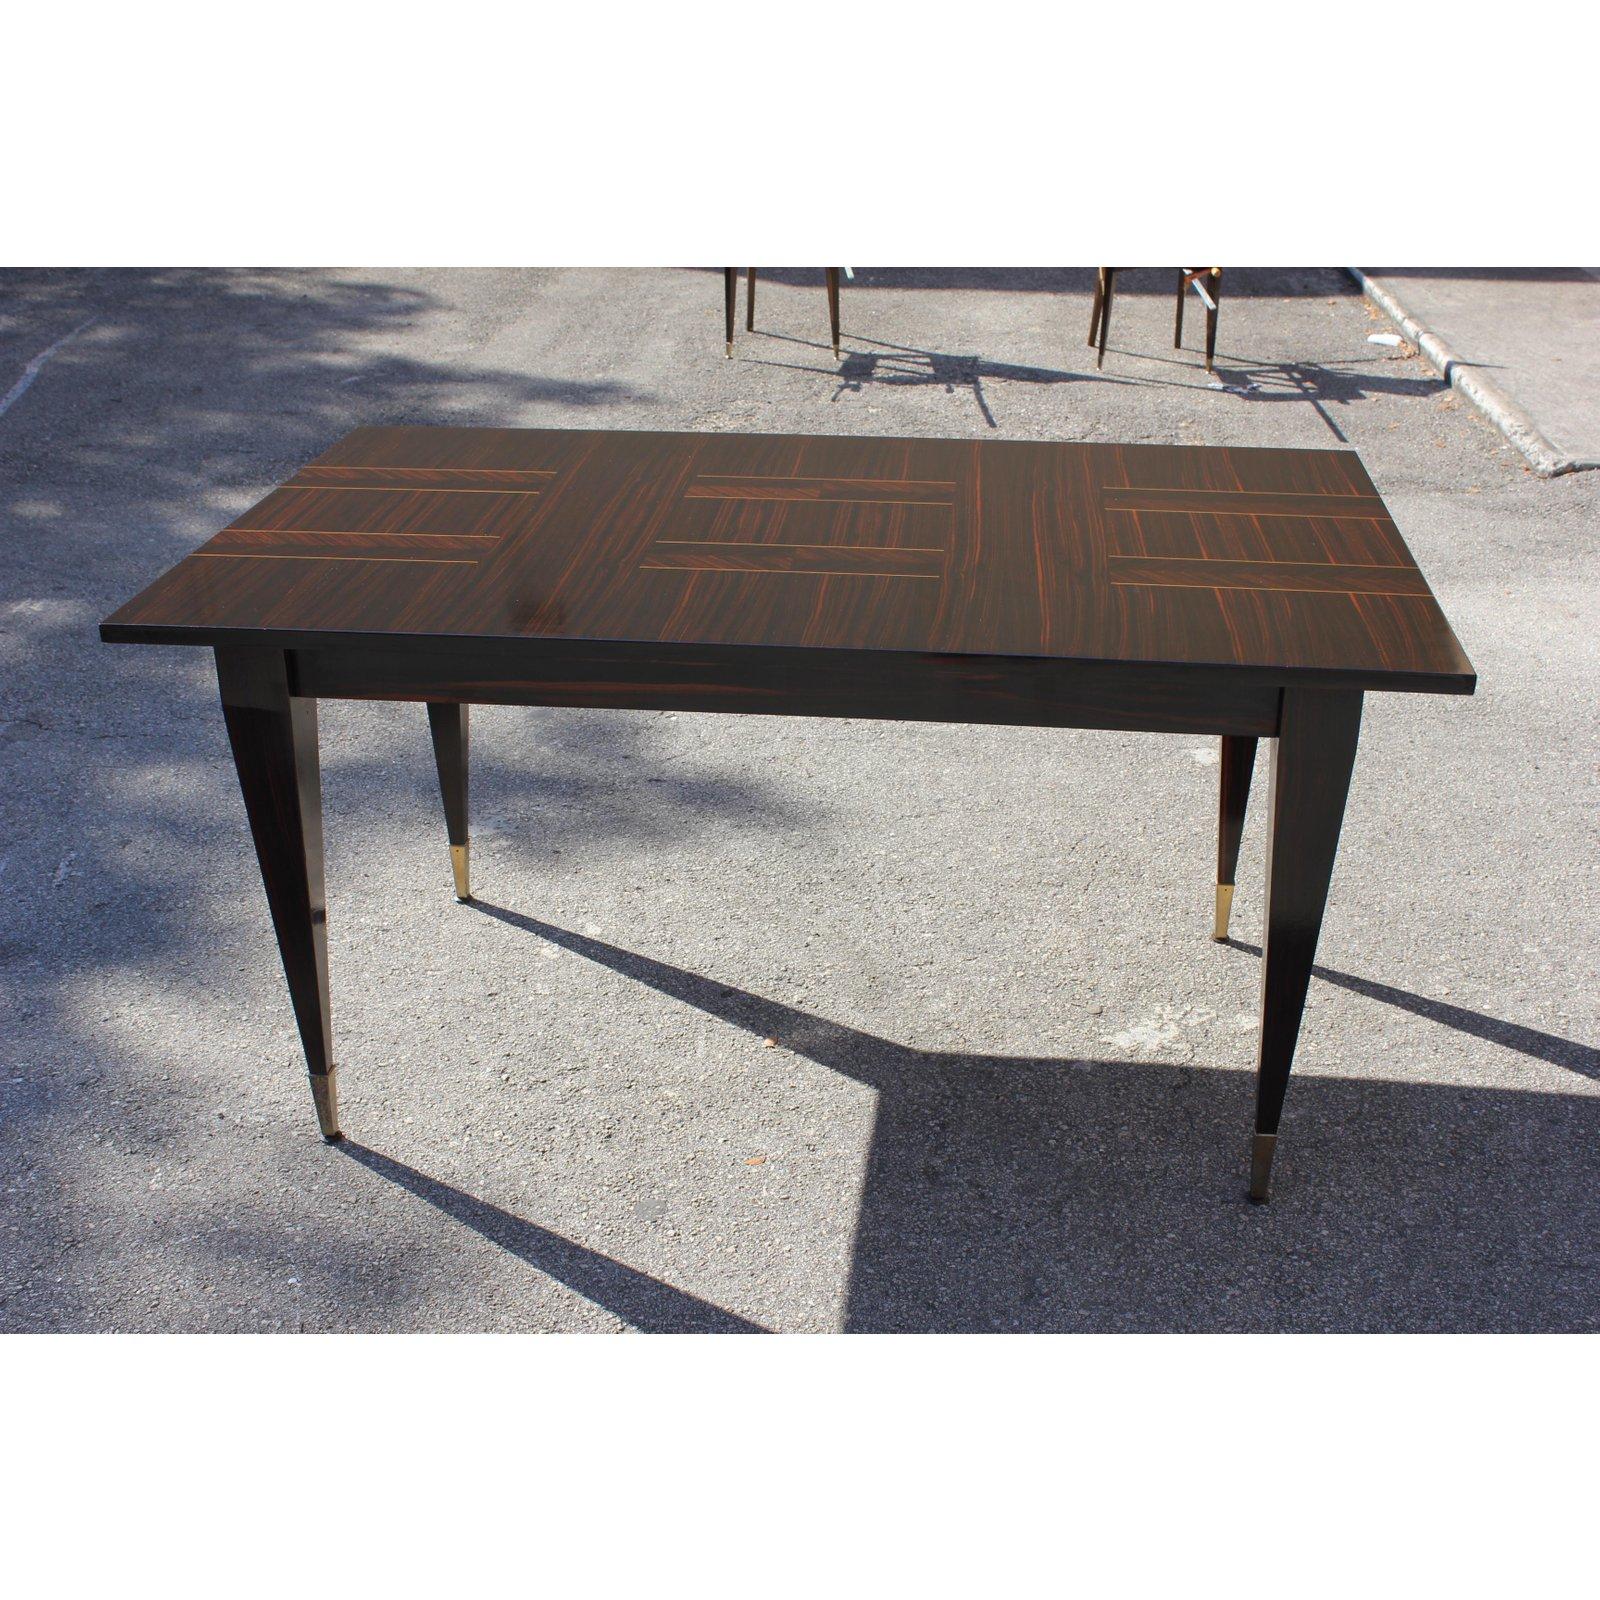 Stunning midcentury French exotic Macassar ebony dining table or writing desks. Solid Macassar ebony wood legs with brass hardware caps. Very nice centre Macassar design top. Dimensions: H 30 in. x W 59.13 in. x D 35.50. We traveled to buy all our